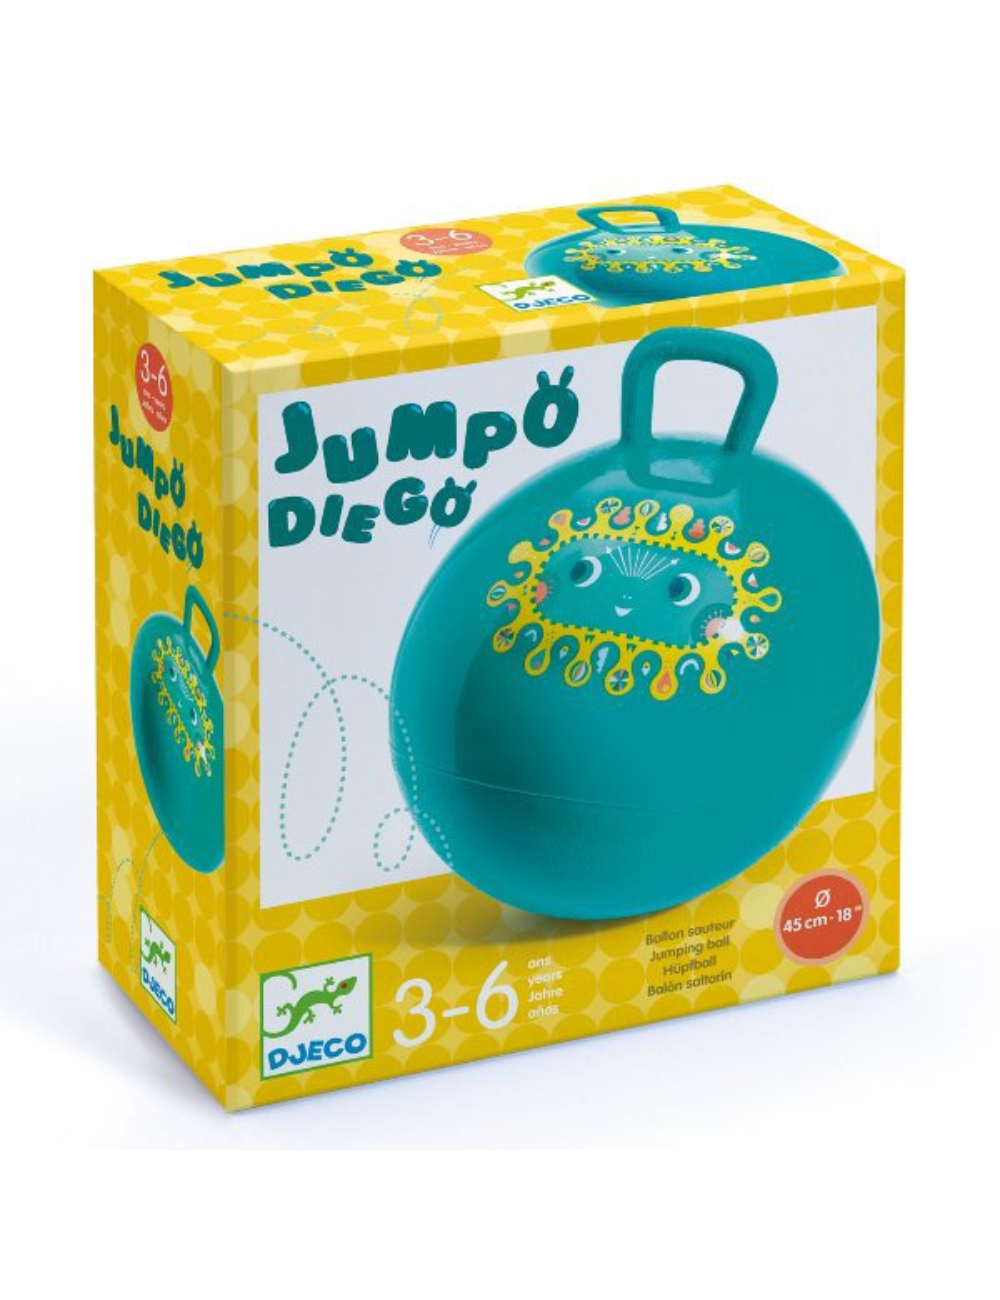 Jumping Hopping Ball - Diego